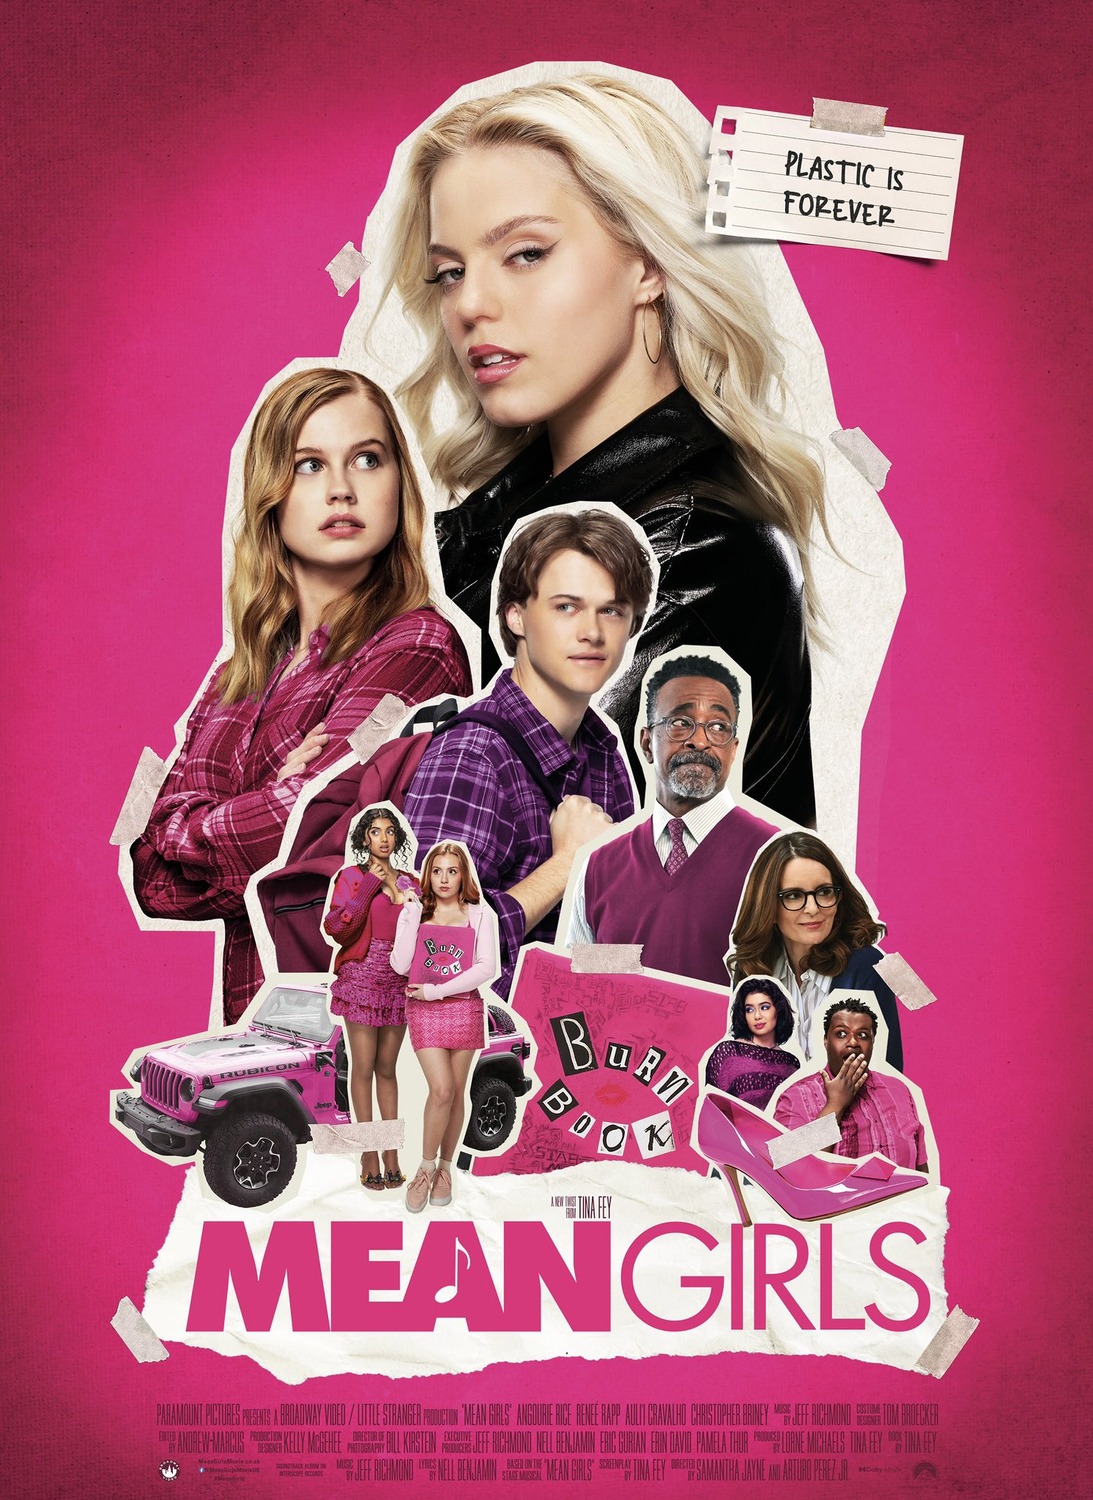 Who played the hot guy in Mean Girls? Why is Mean Girls rated 18?